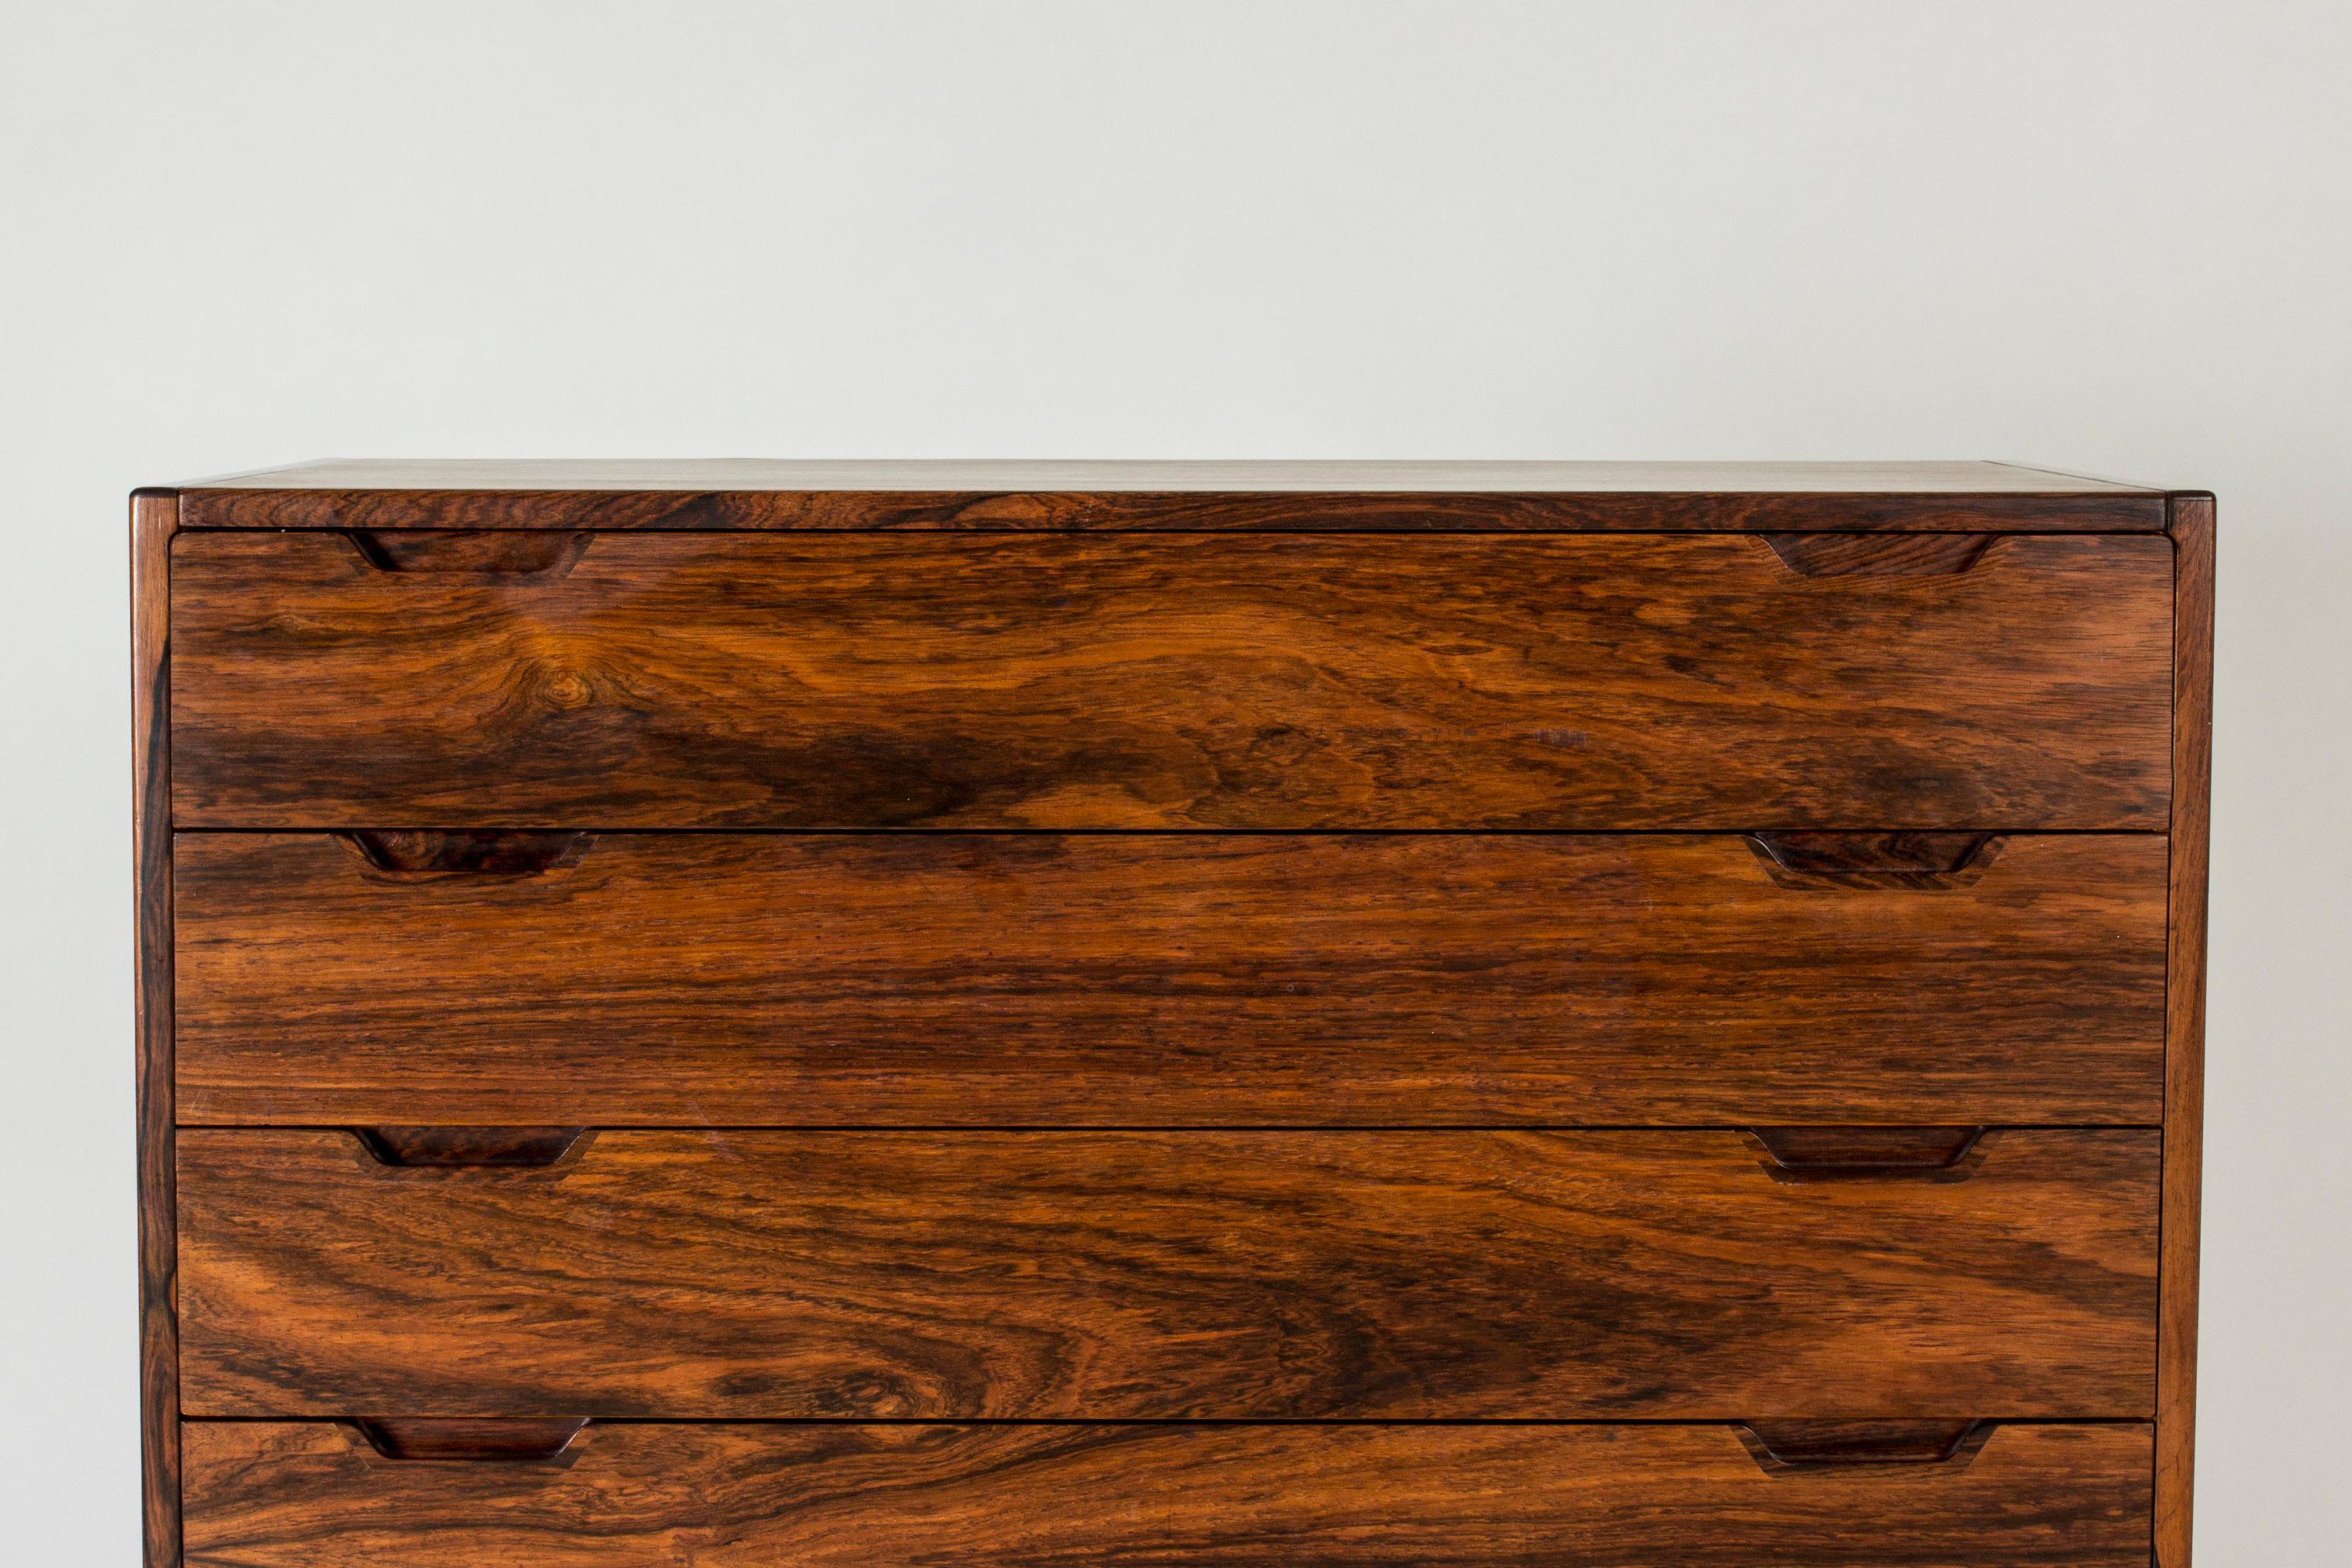 Sleek chest of drawers by Svend Langkilde, made from rosewood with beautiful woodgrain. Large model with elegant recessed handles.